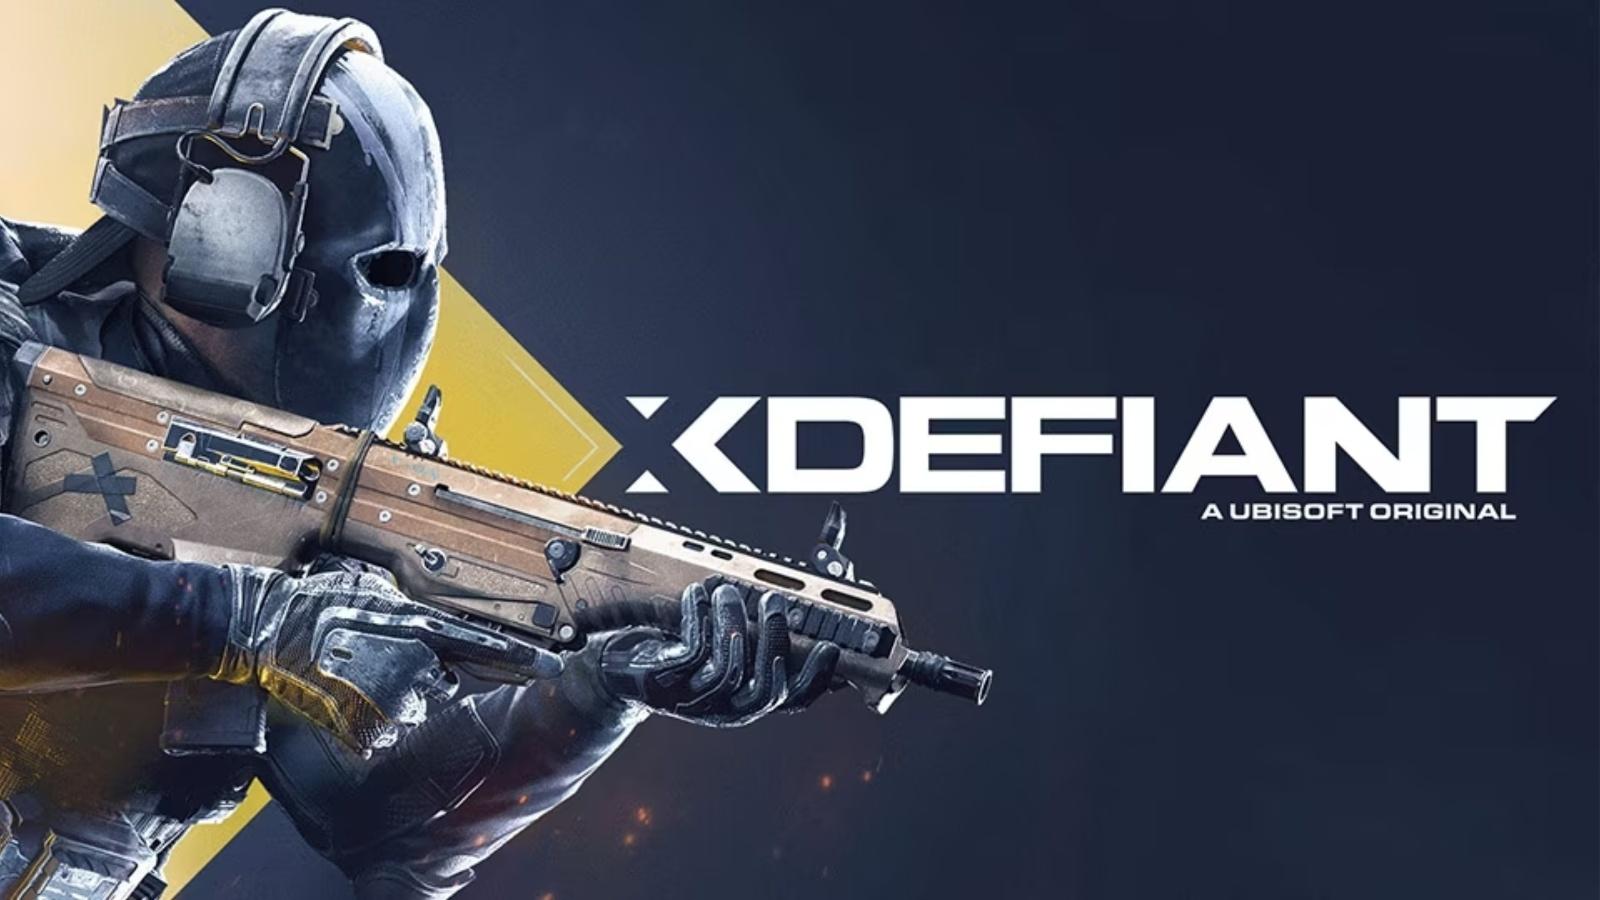 XDEFIENT is a new free to play FPS coming out in 2023 on all platforms